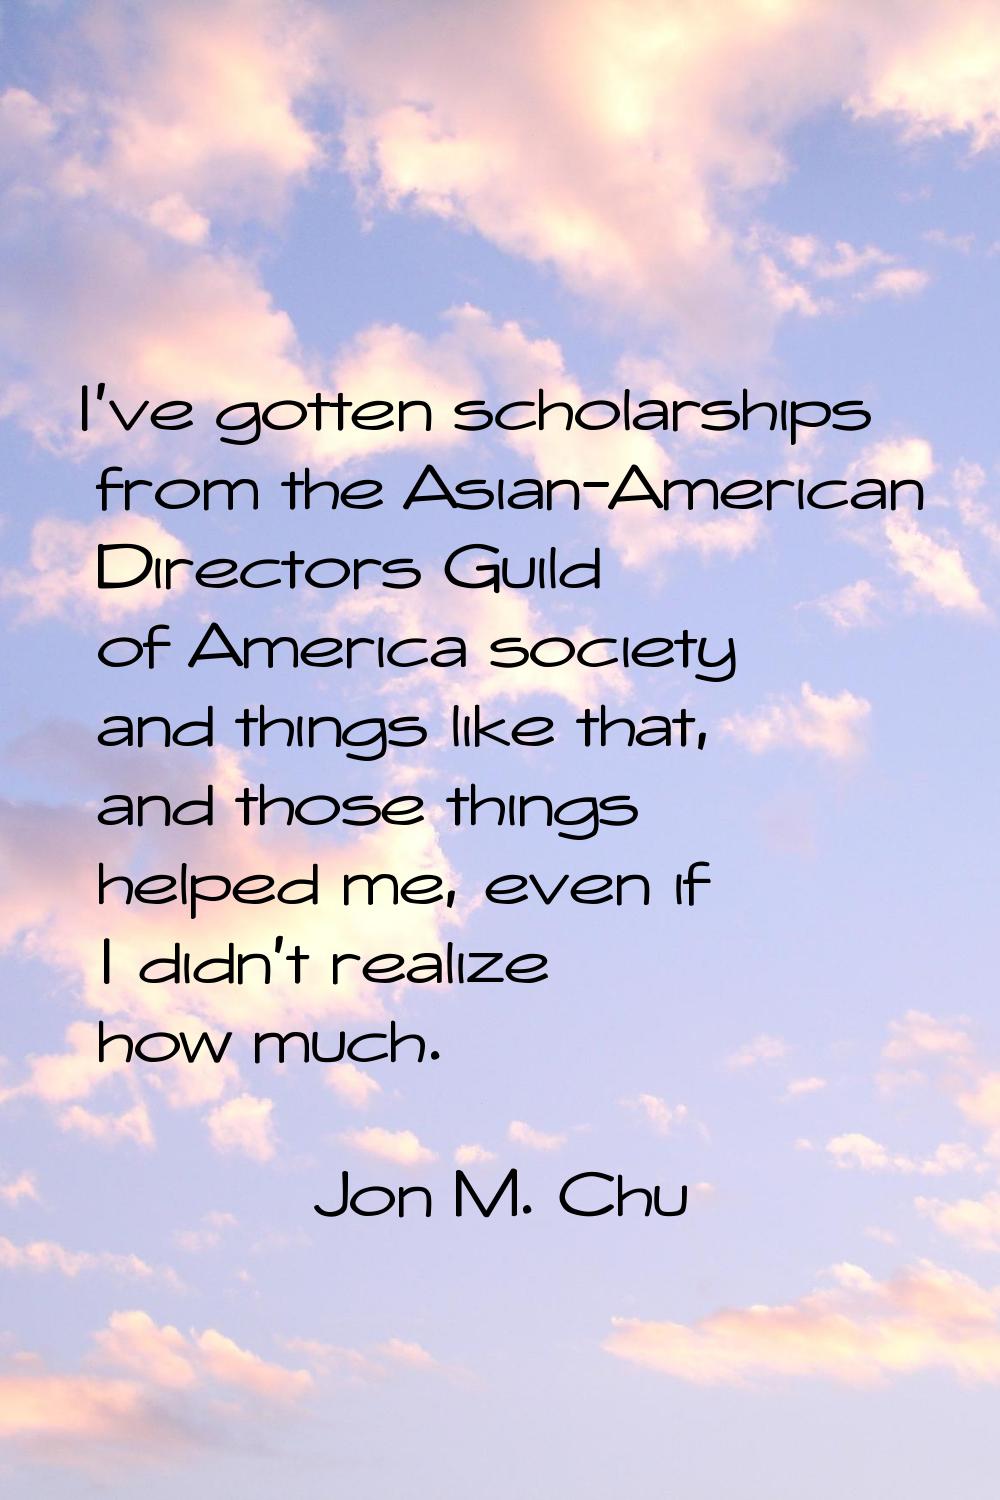 I've gotten scholarships from the Asian-American Directors Guild of America society and things like